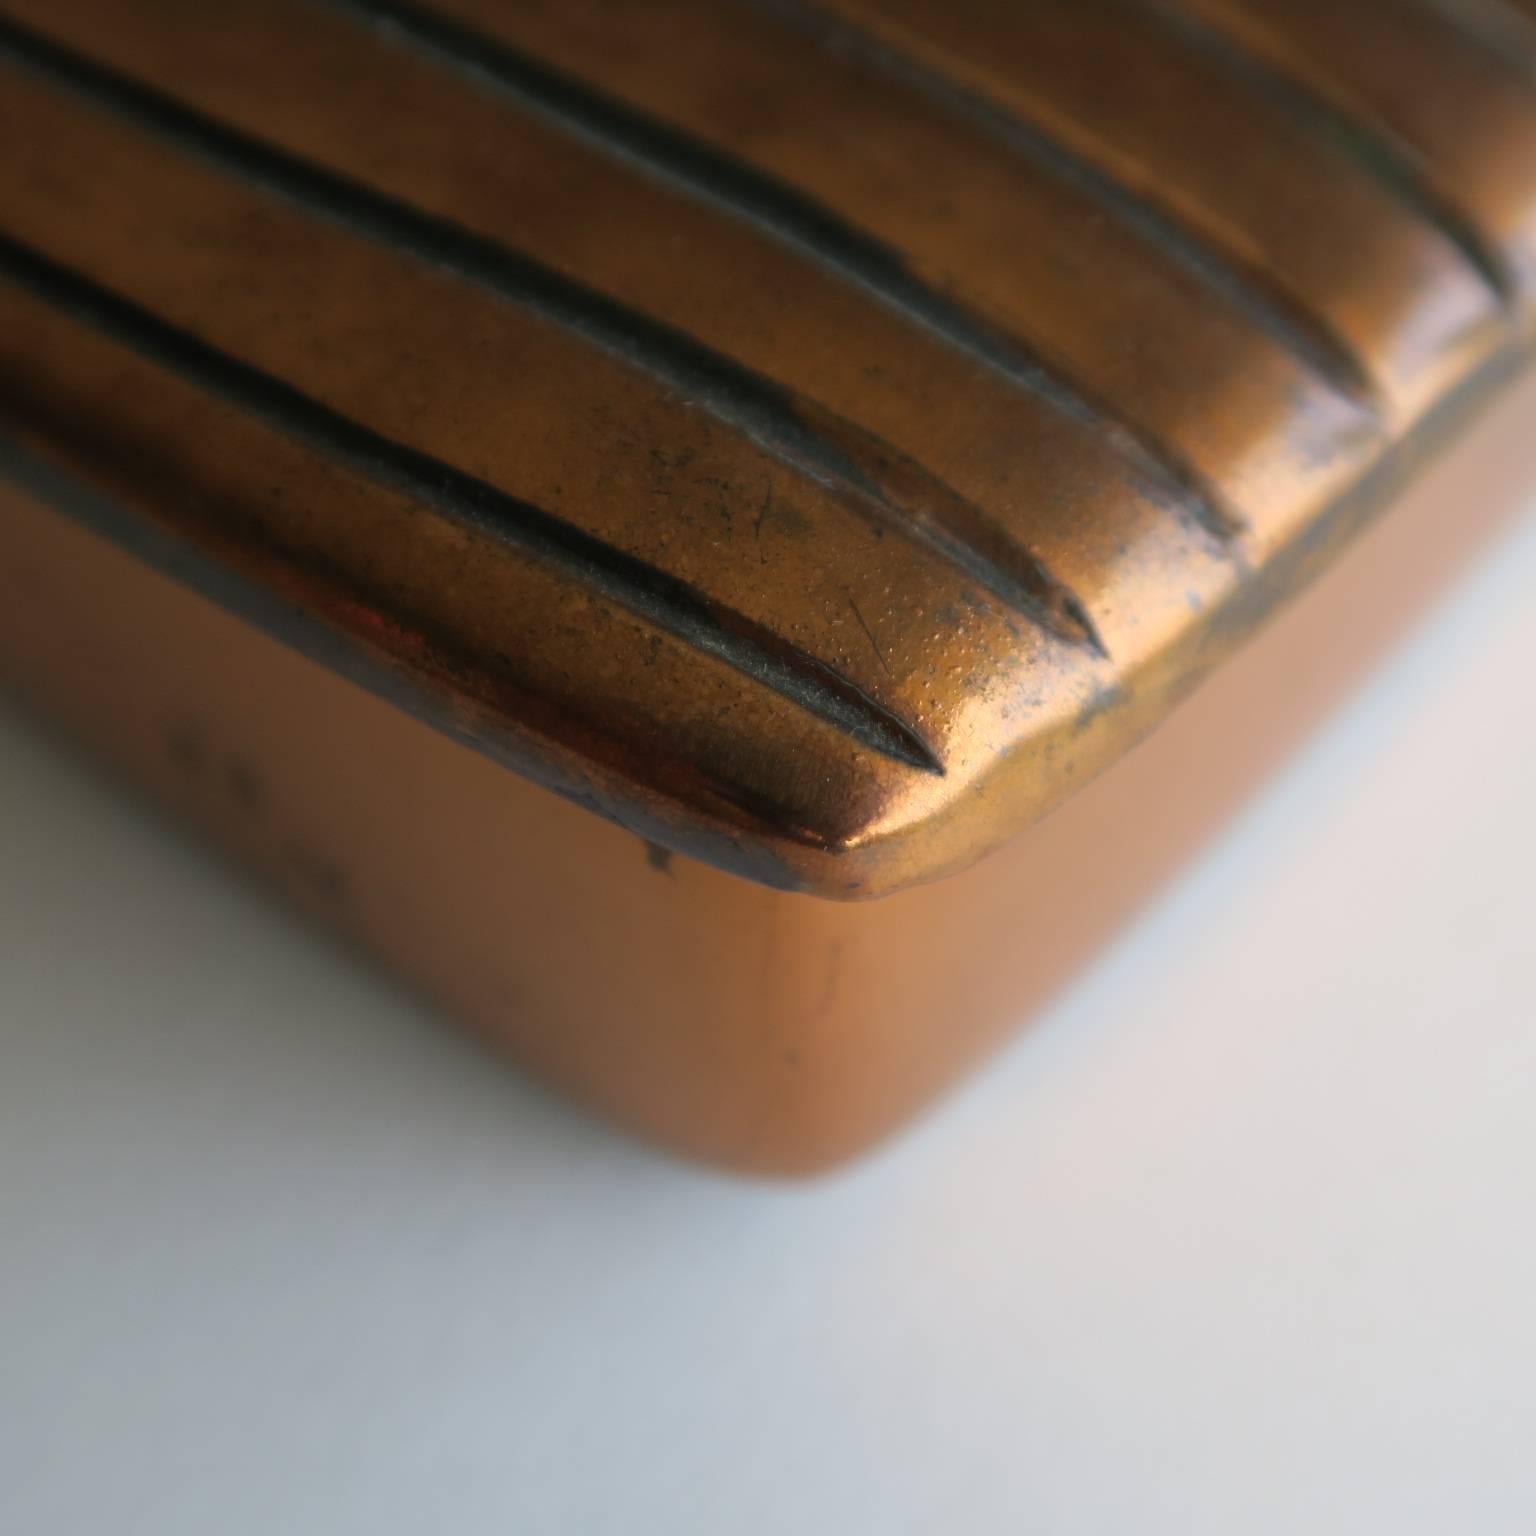 American Vintage Decorative Copper-Plated Metal Box in Rectangular Form with Lines Design For Sale